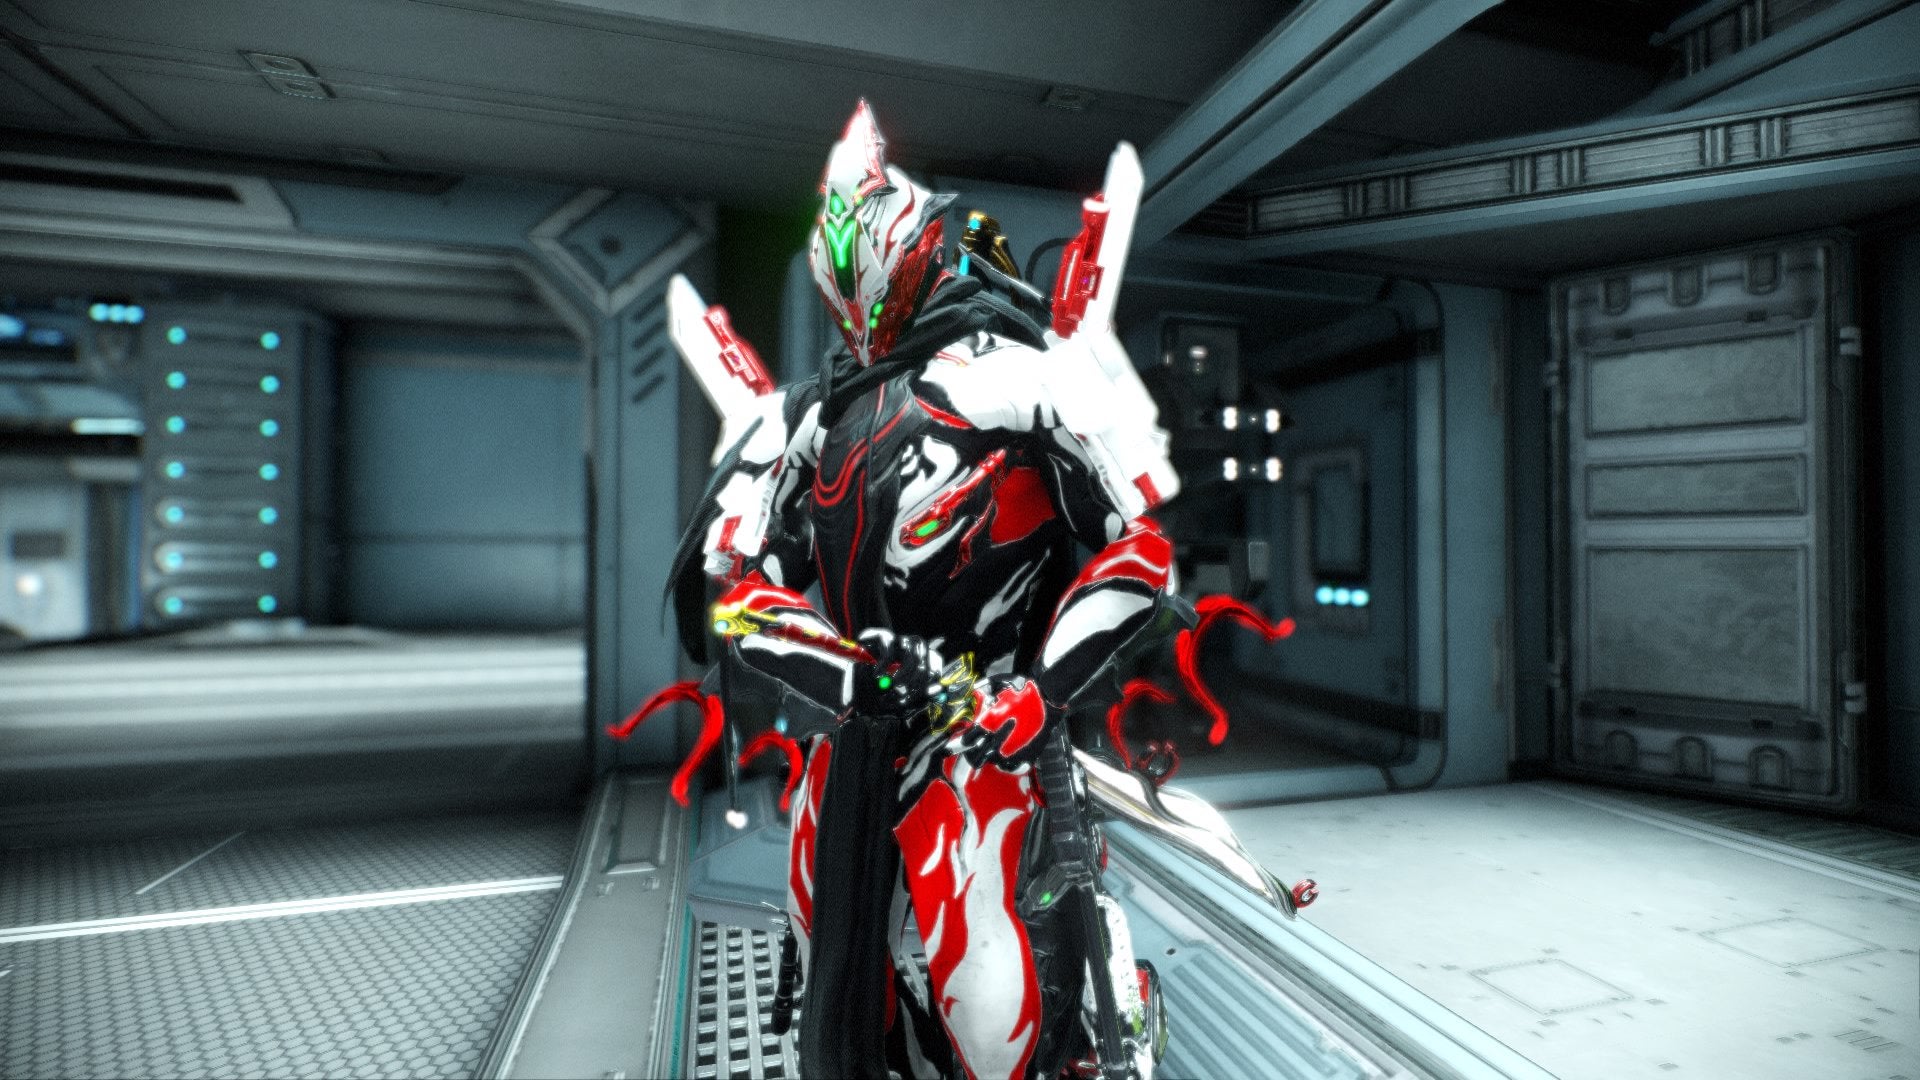 Is my cosplayframe good? It's supposed to be gundam astray red frame